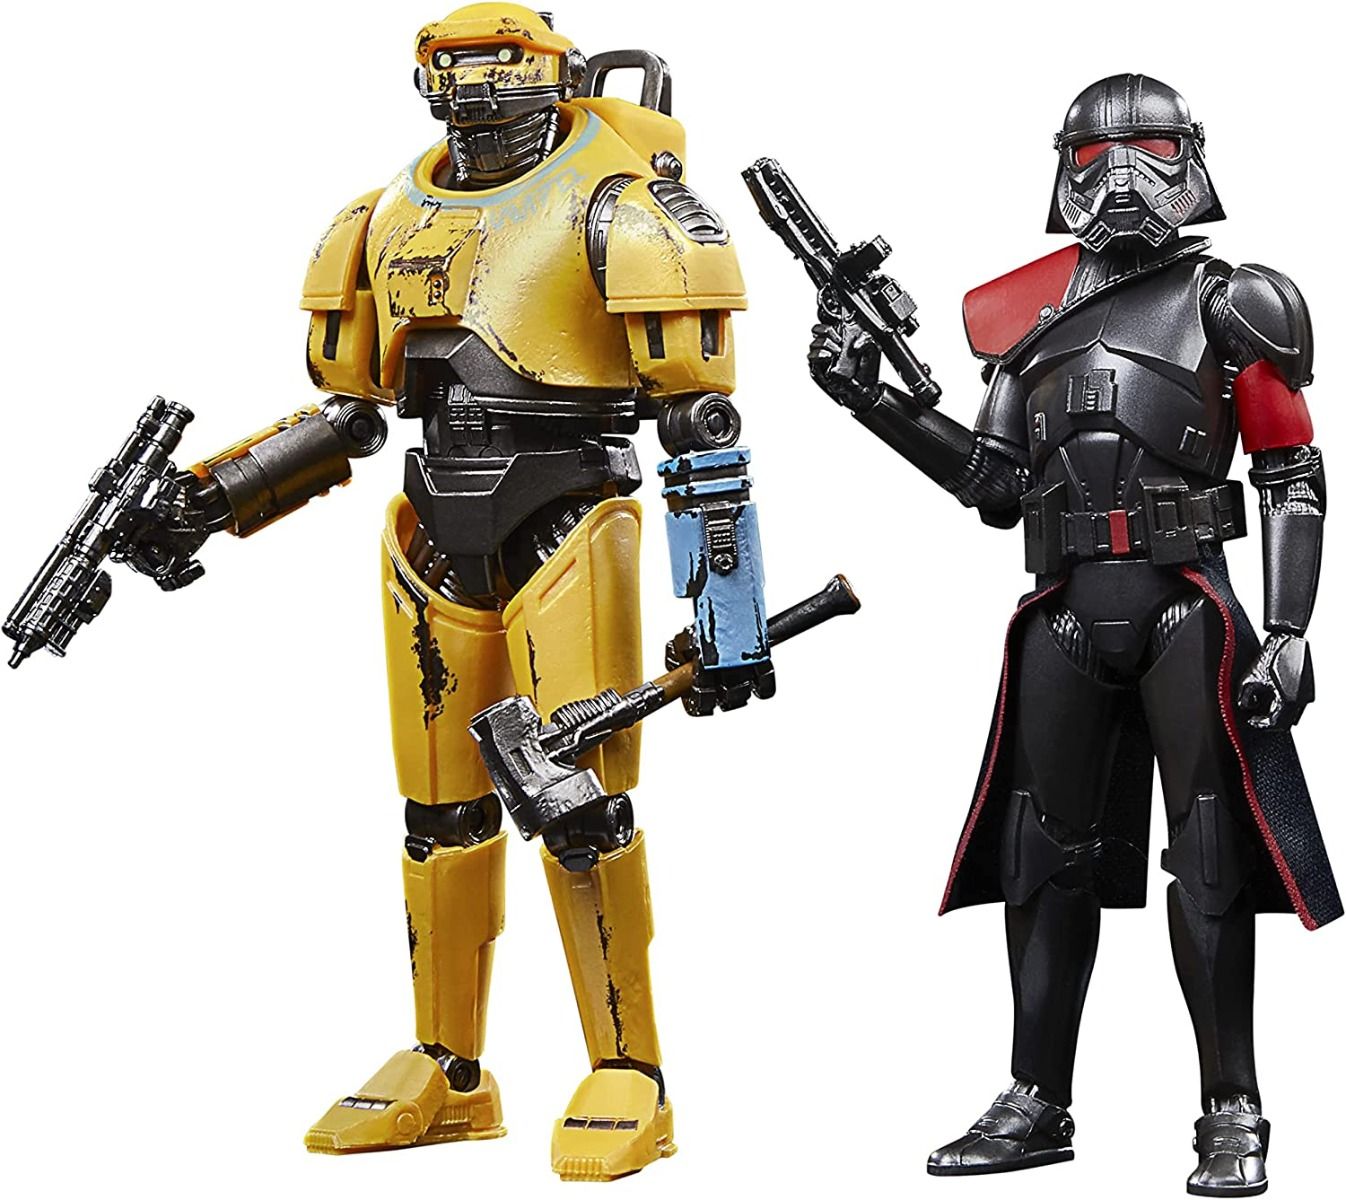 Star Wars TBS SWOK Carbonized Collection NED-B & Purge Trooper 2-Pack画像